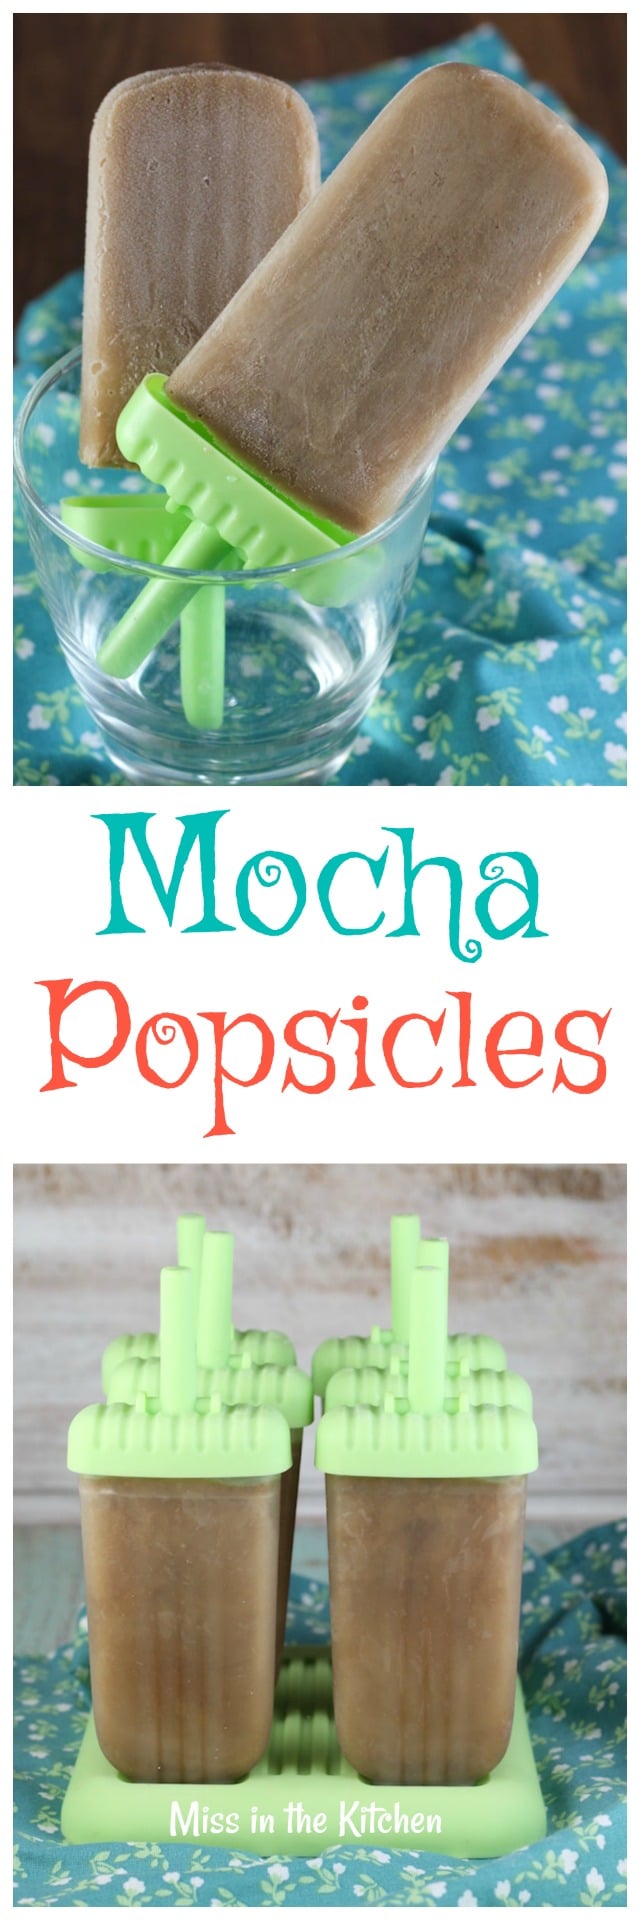 Mocha Popsicles Recipe ~ Easy Summer Treat made with just 4 ingredients ~ MissintheKitchen.com #Sponsored by Nielsen- Massey Vanillas